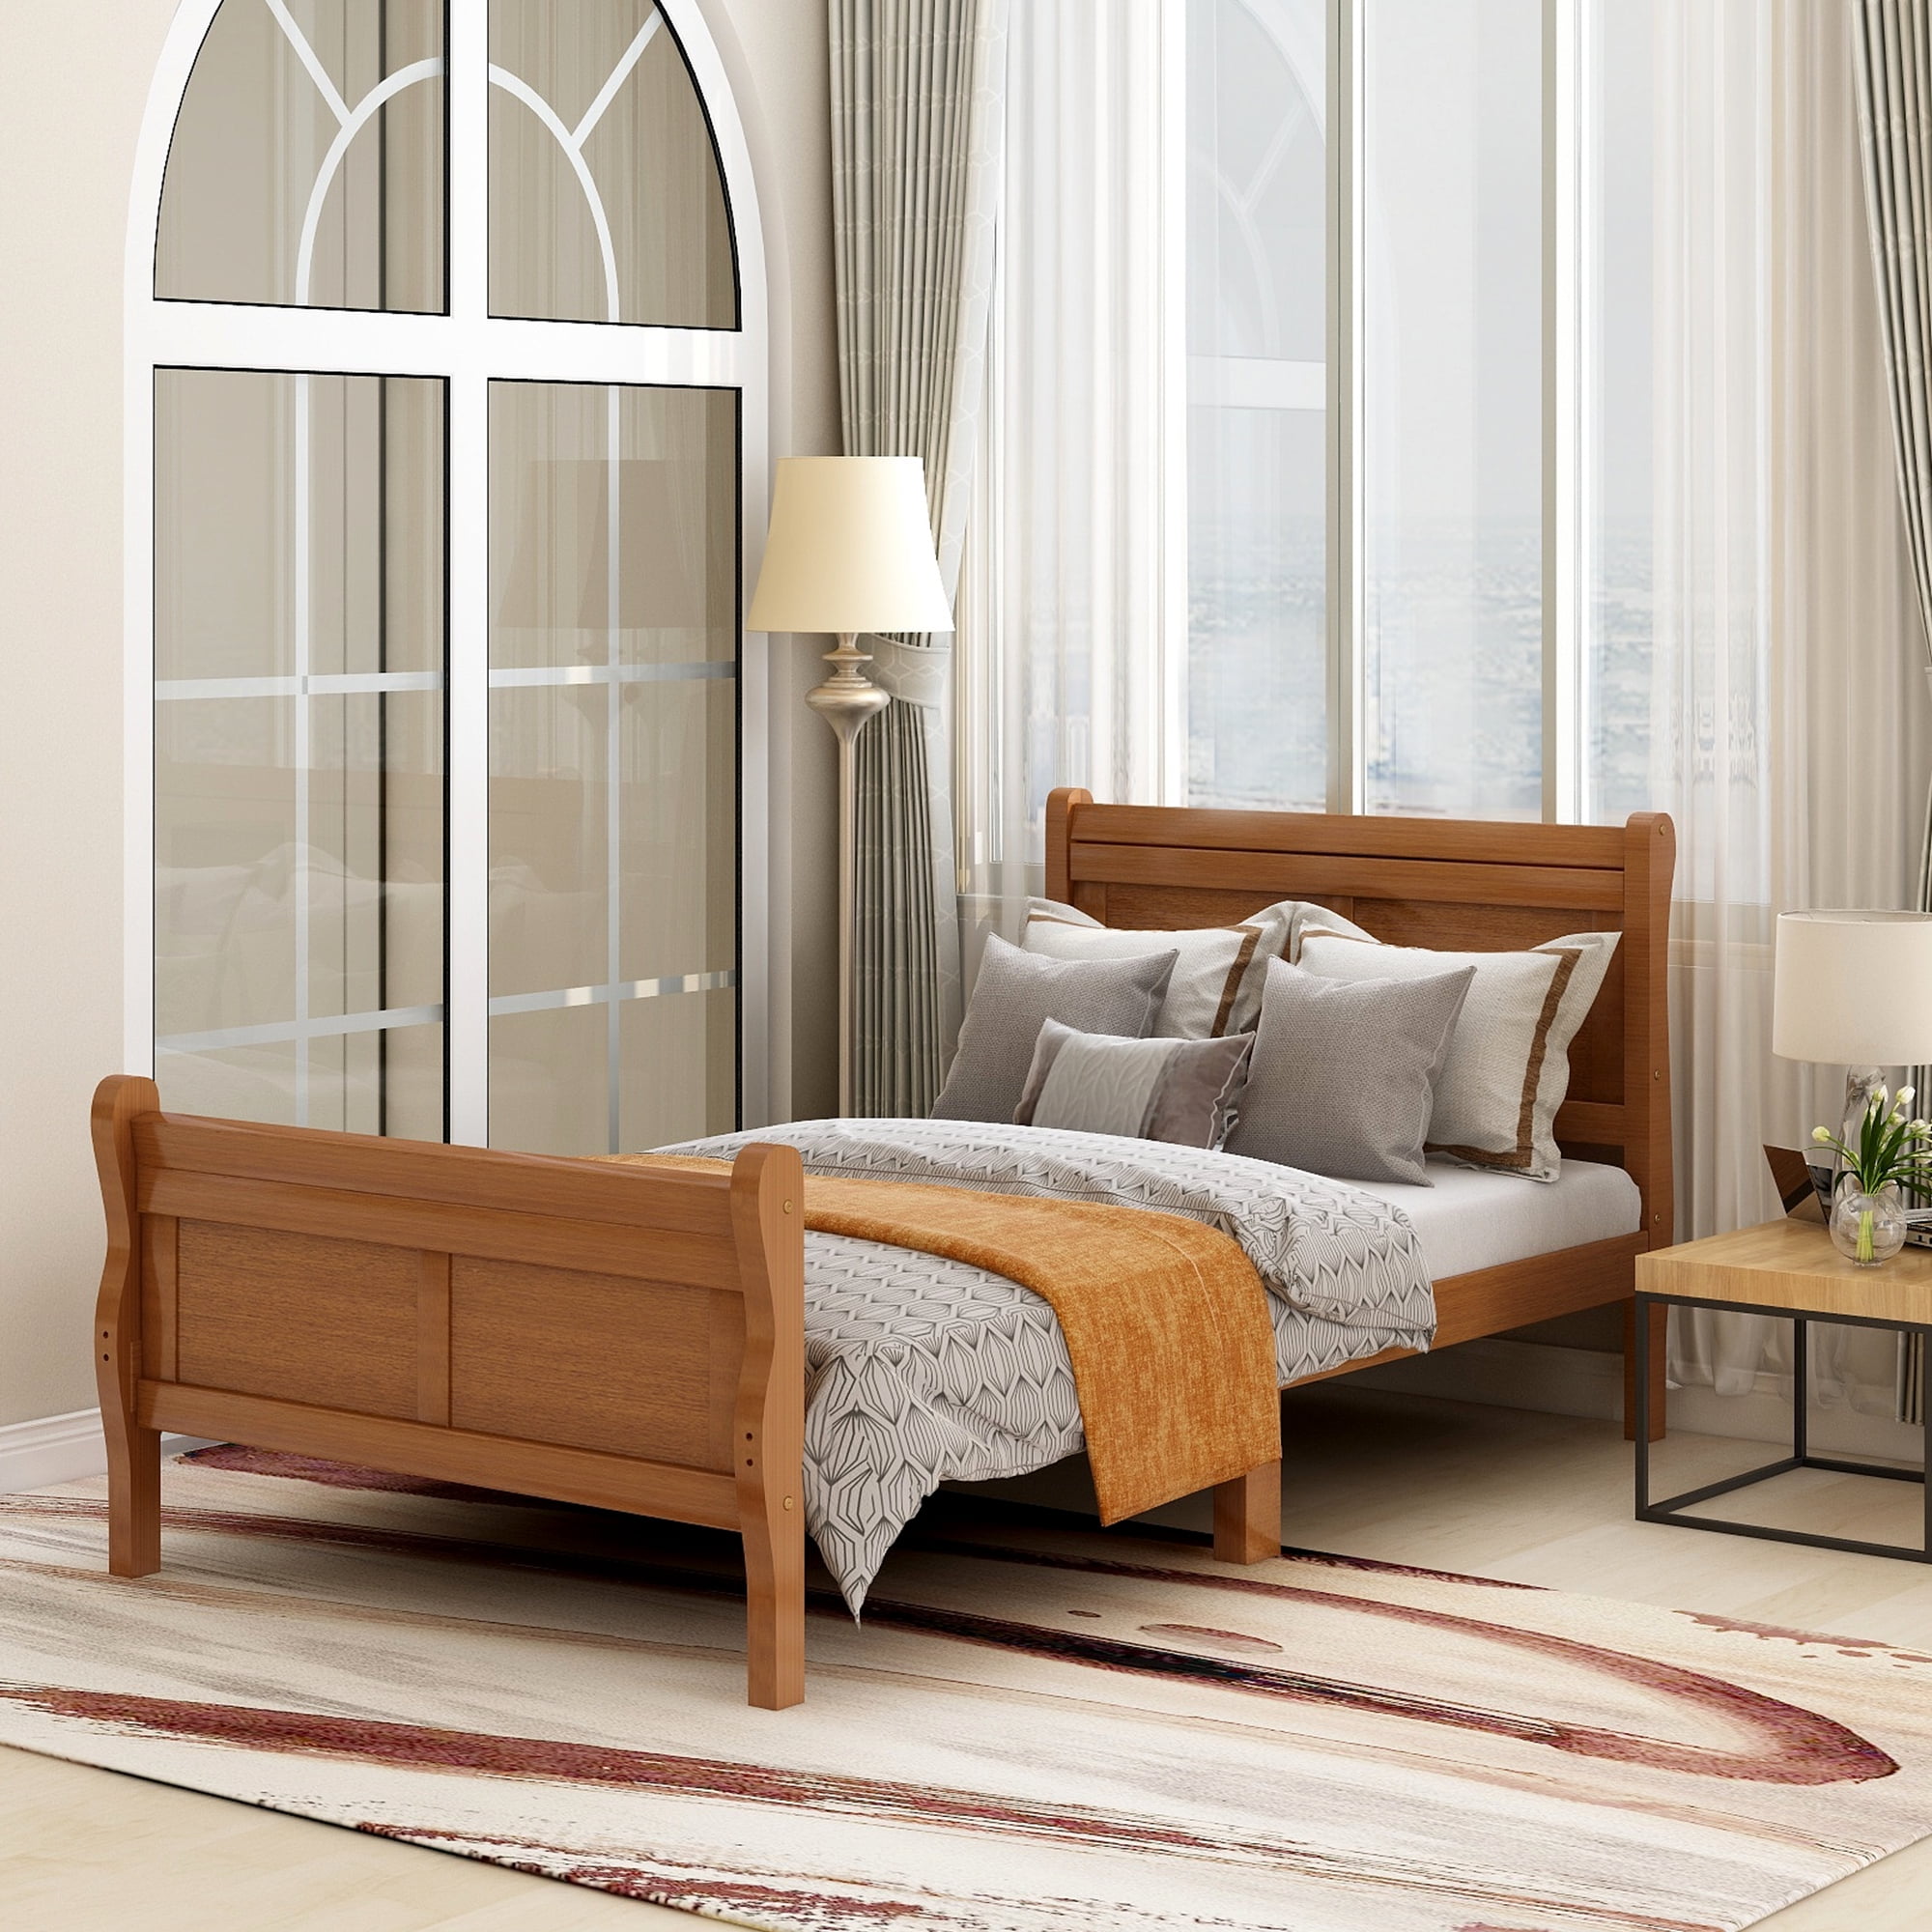 Oak Twin Bed Frame with Headboard, Solid Wood Twin Platform Bed Frame